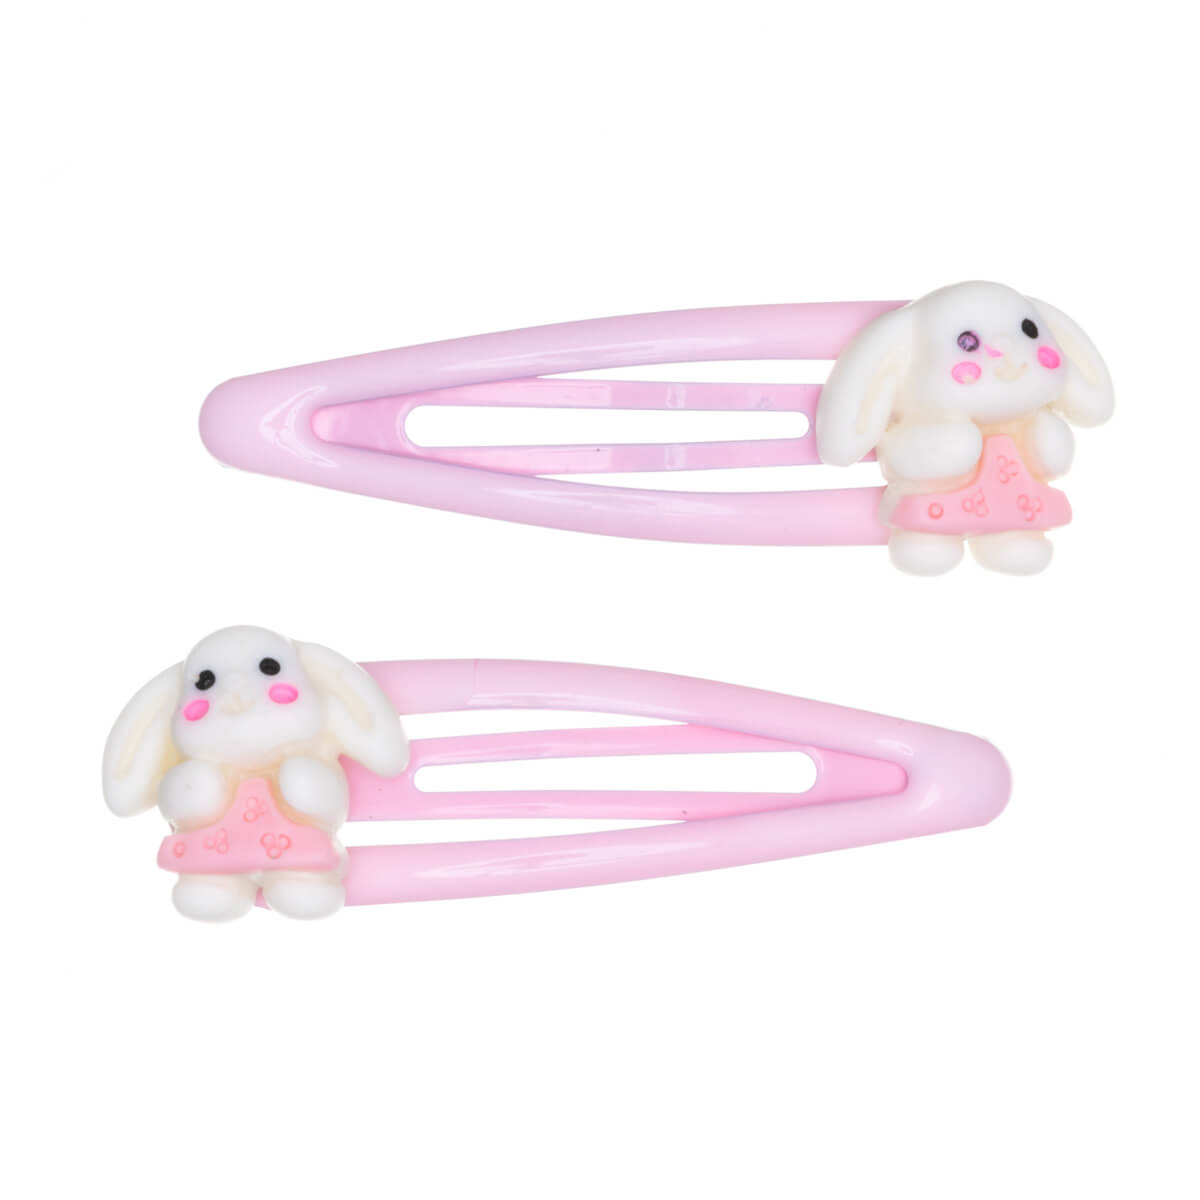 Children's hair clip snap clips small figurines 2pcs